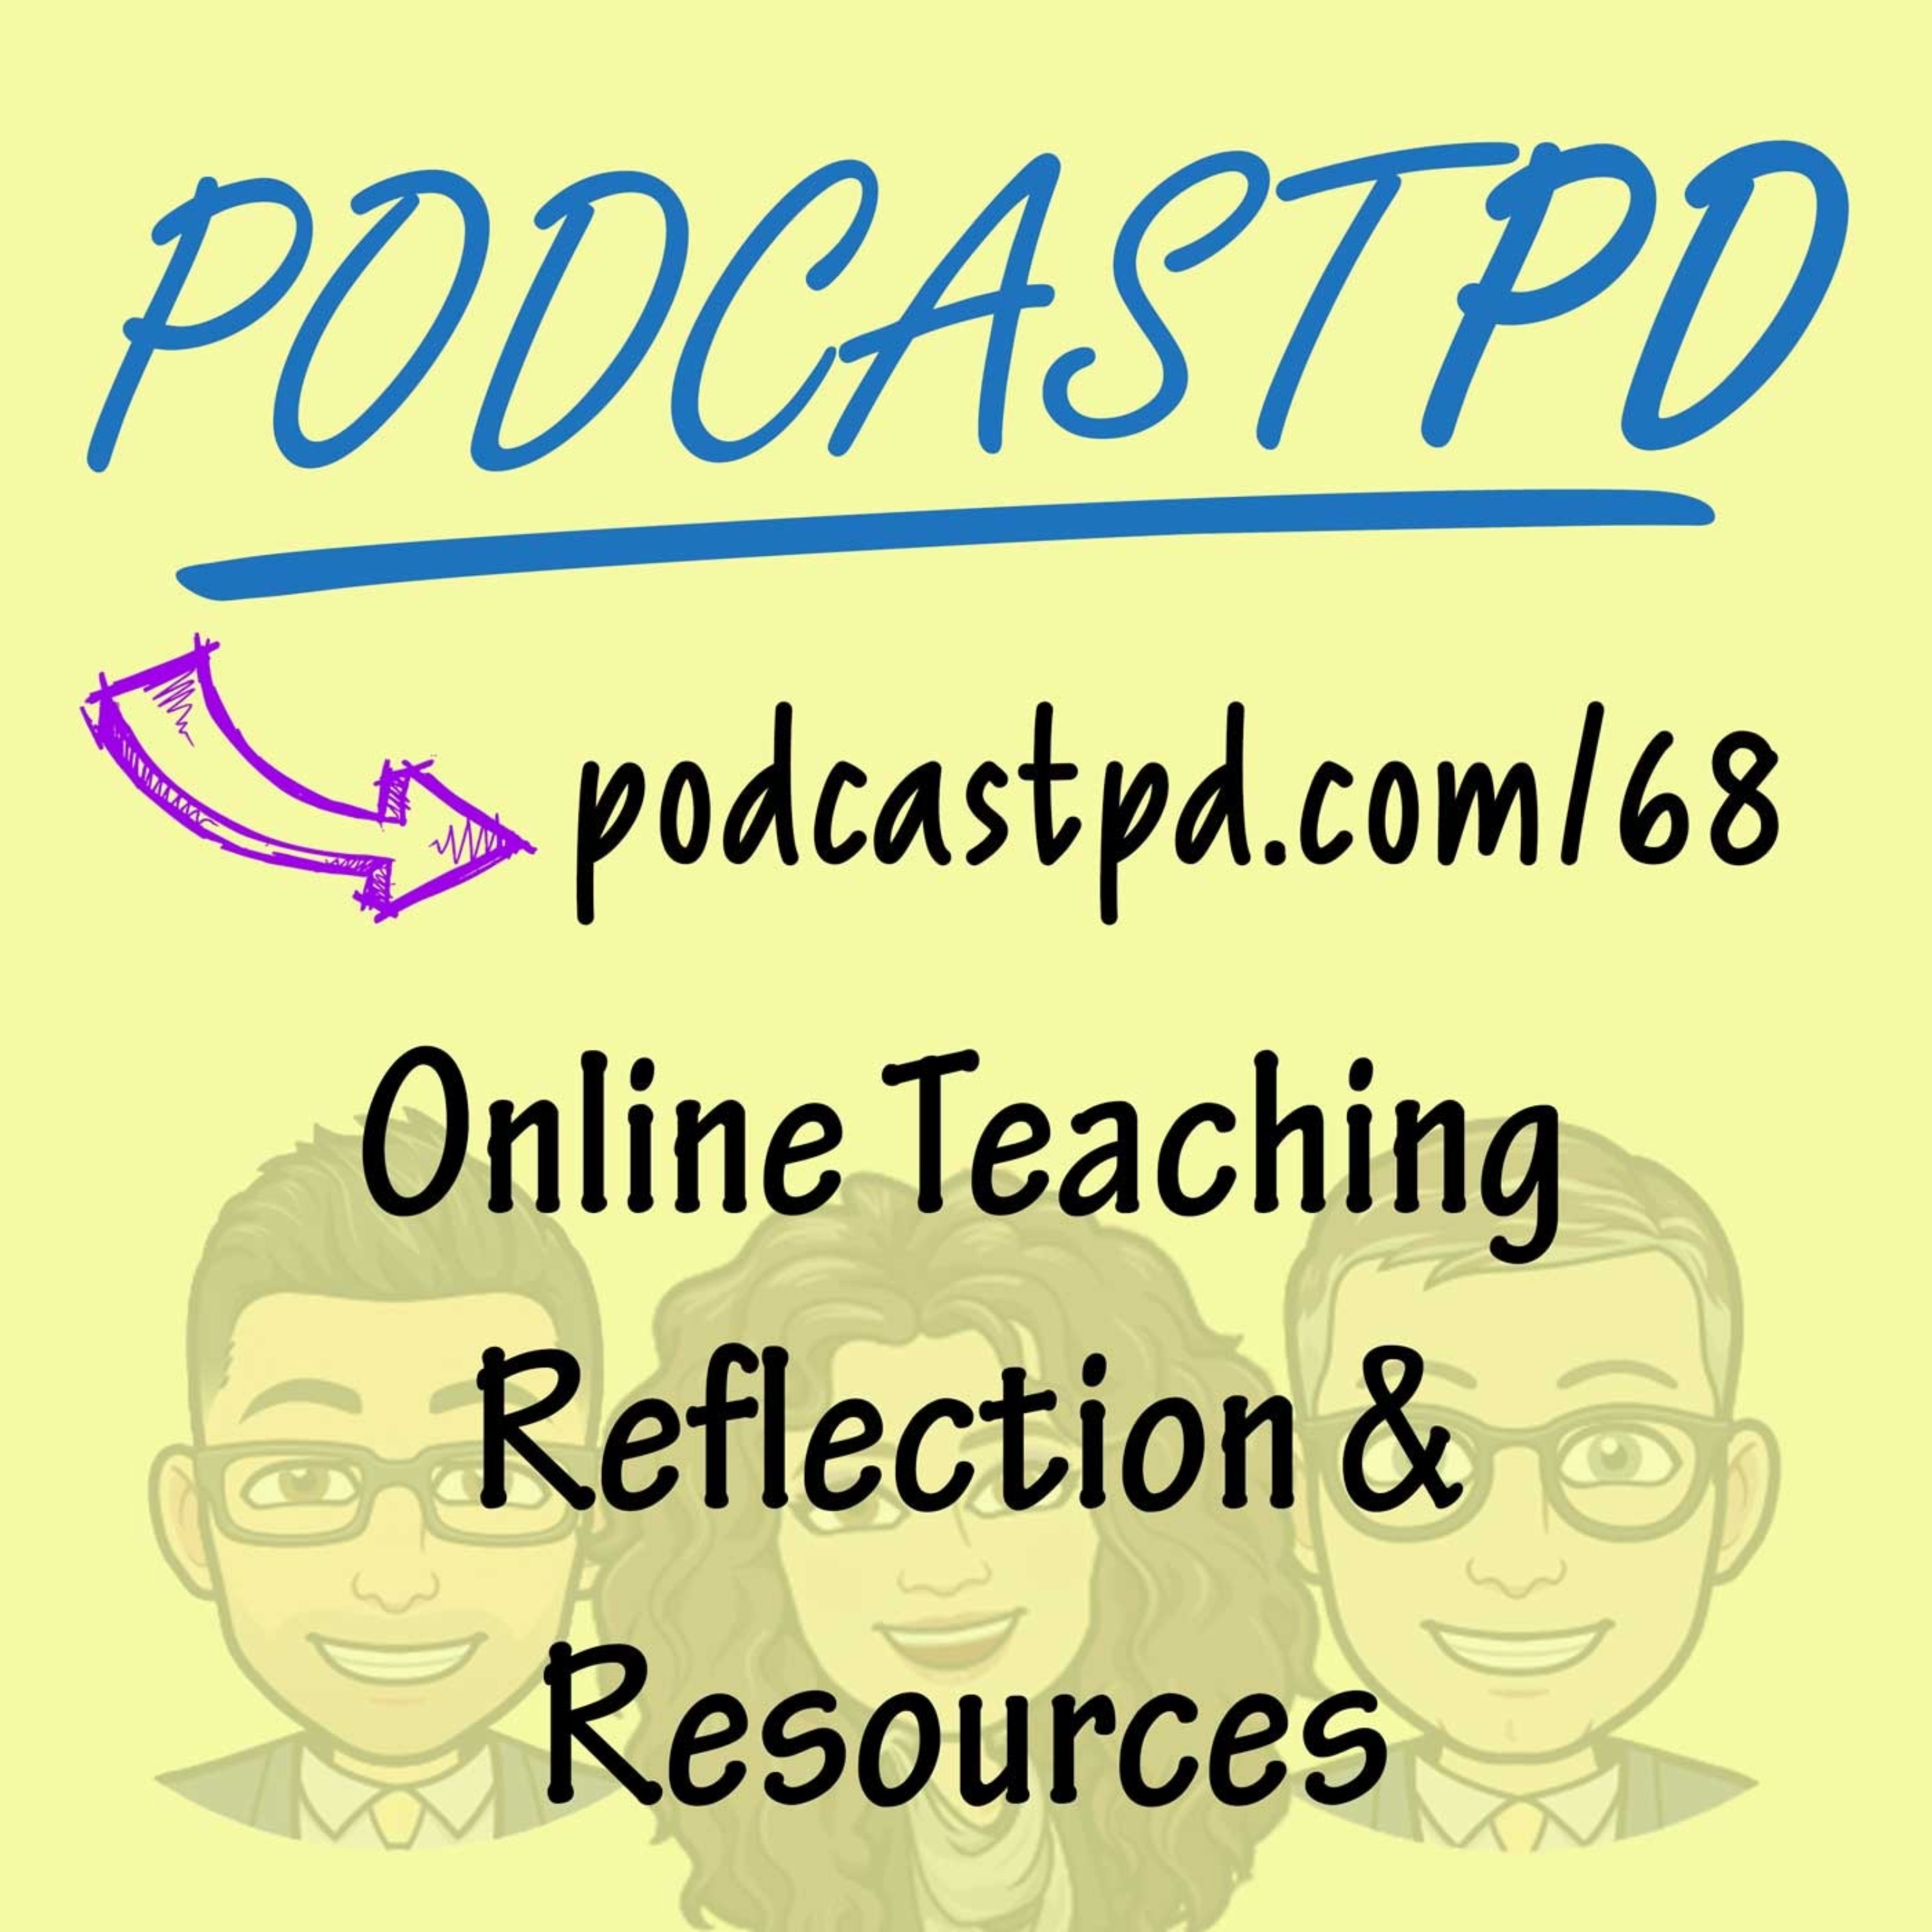 Online Teaching Reflection & Resources - PPD068 Image